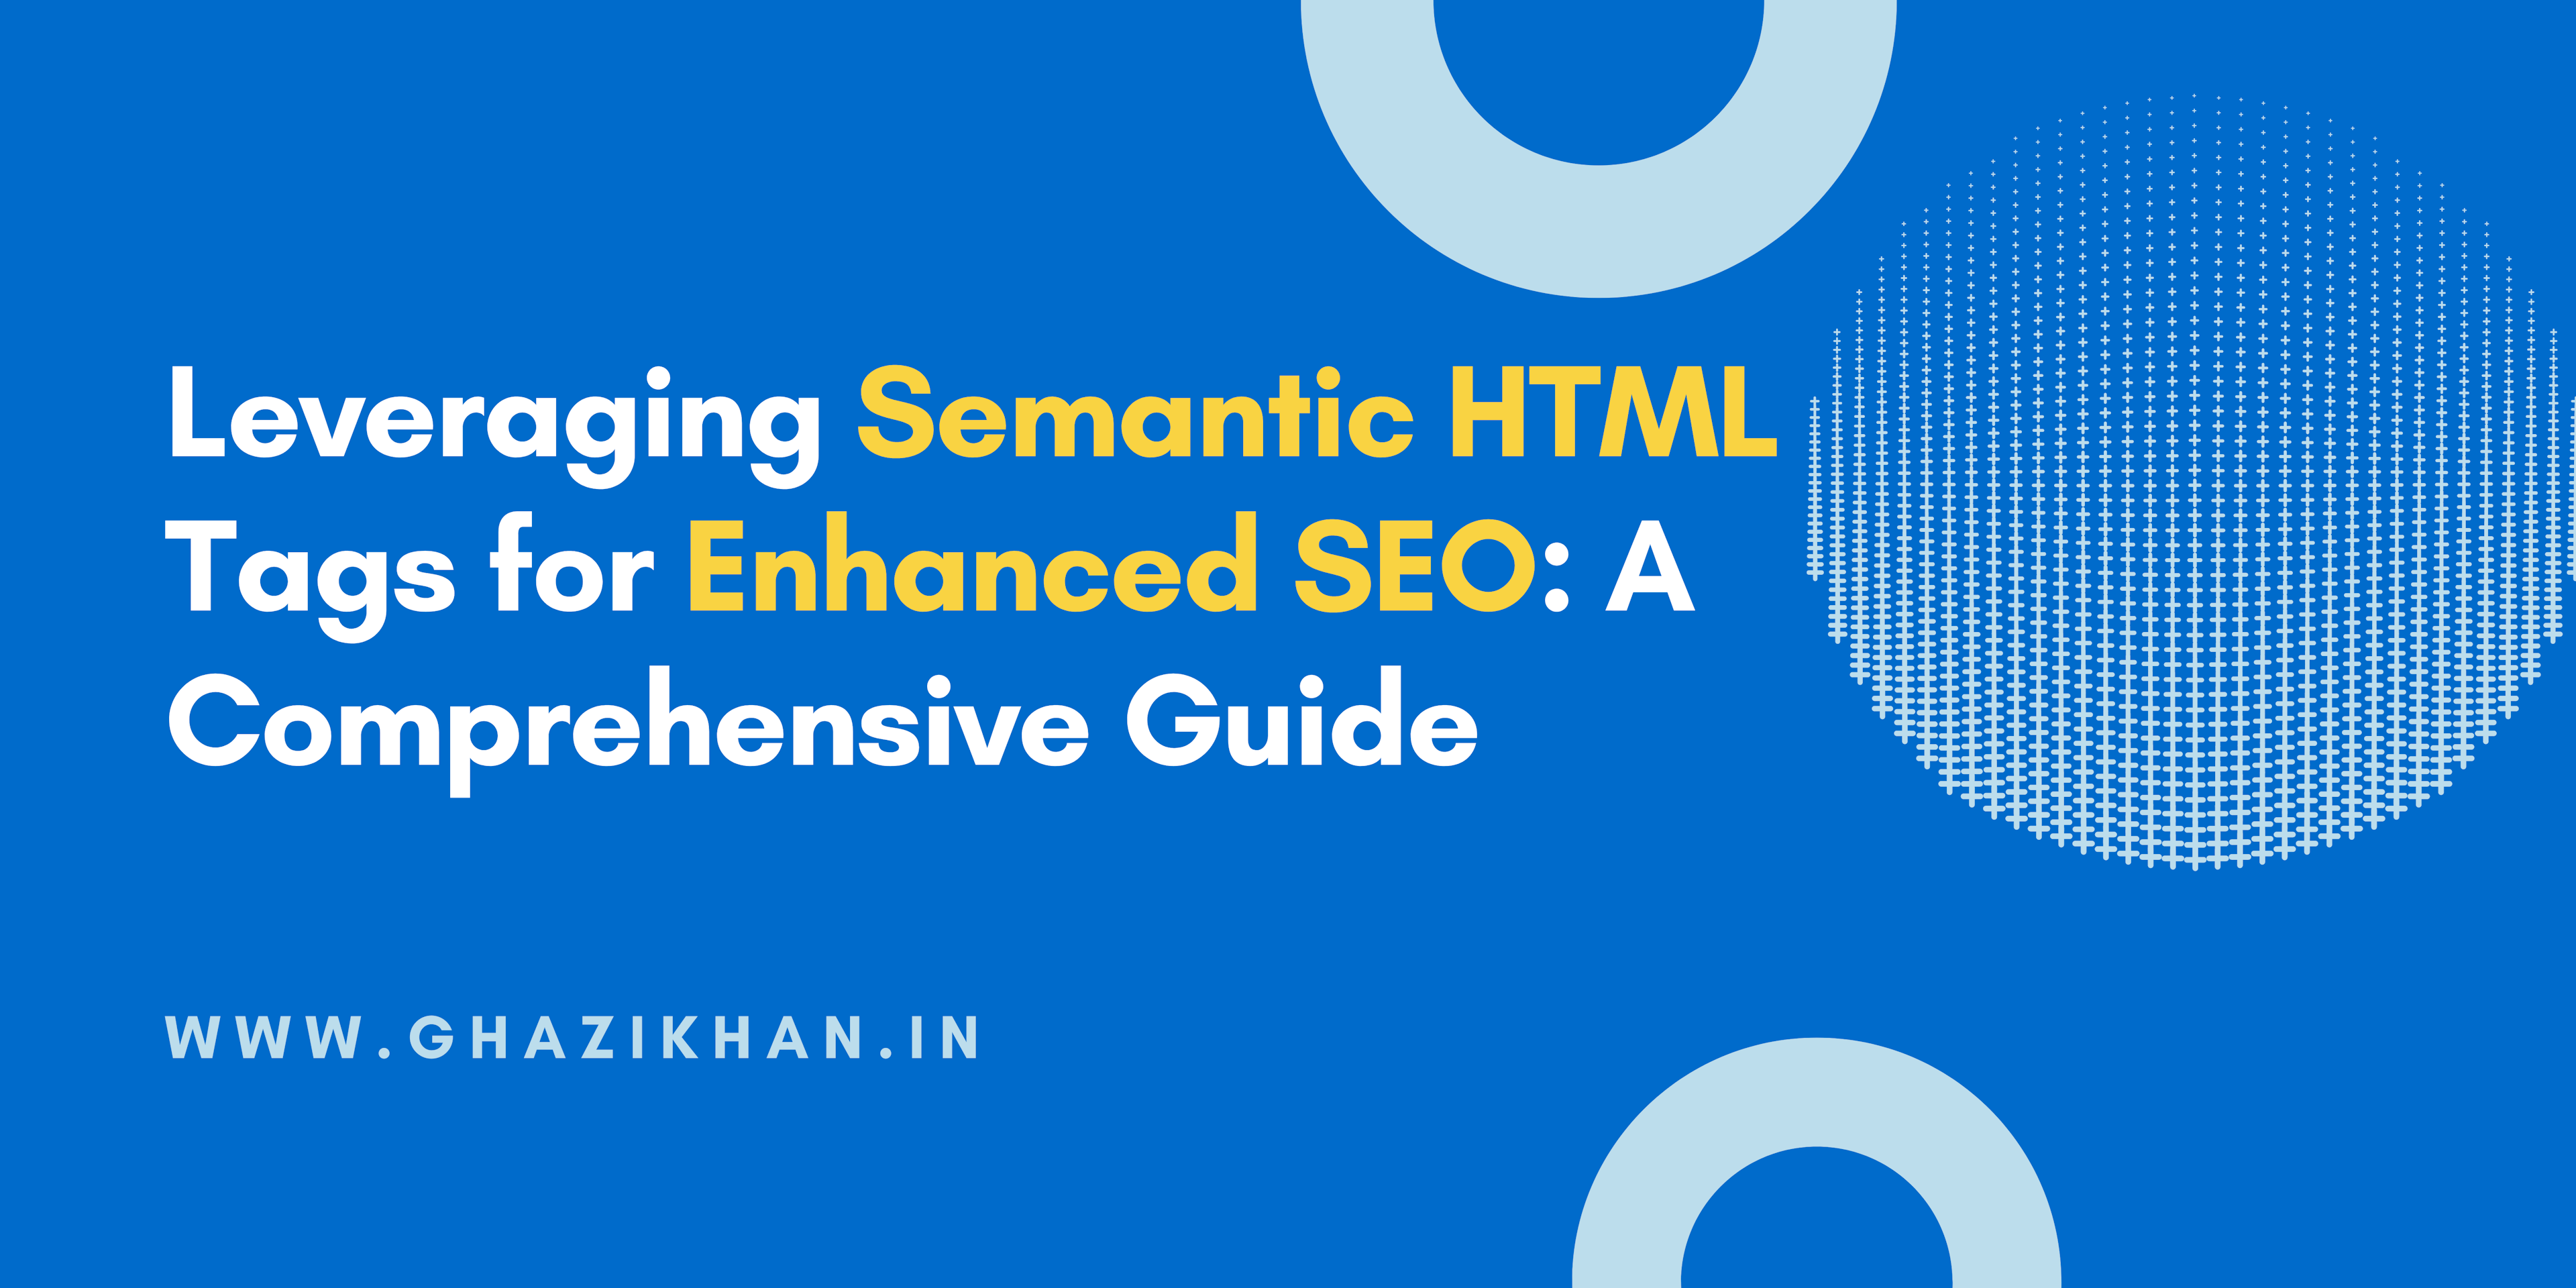 Leveraging Semantic HTML Tags for Enhanced SEO: A Comprehensive Guide